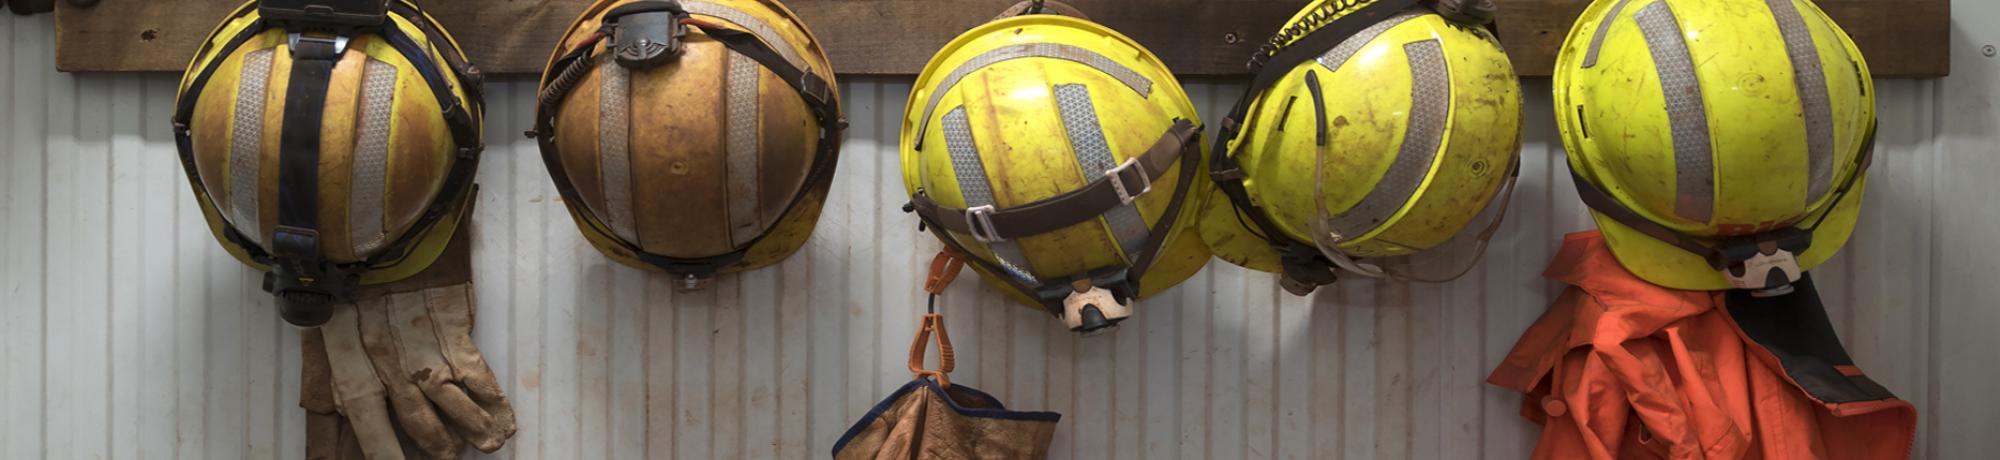 hard hats hanging on a wall